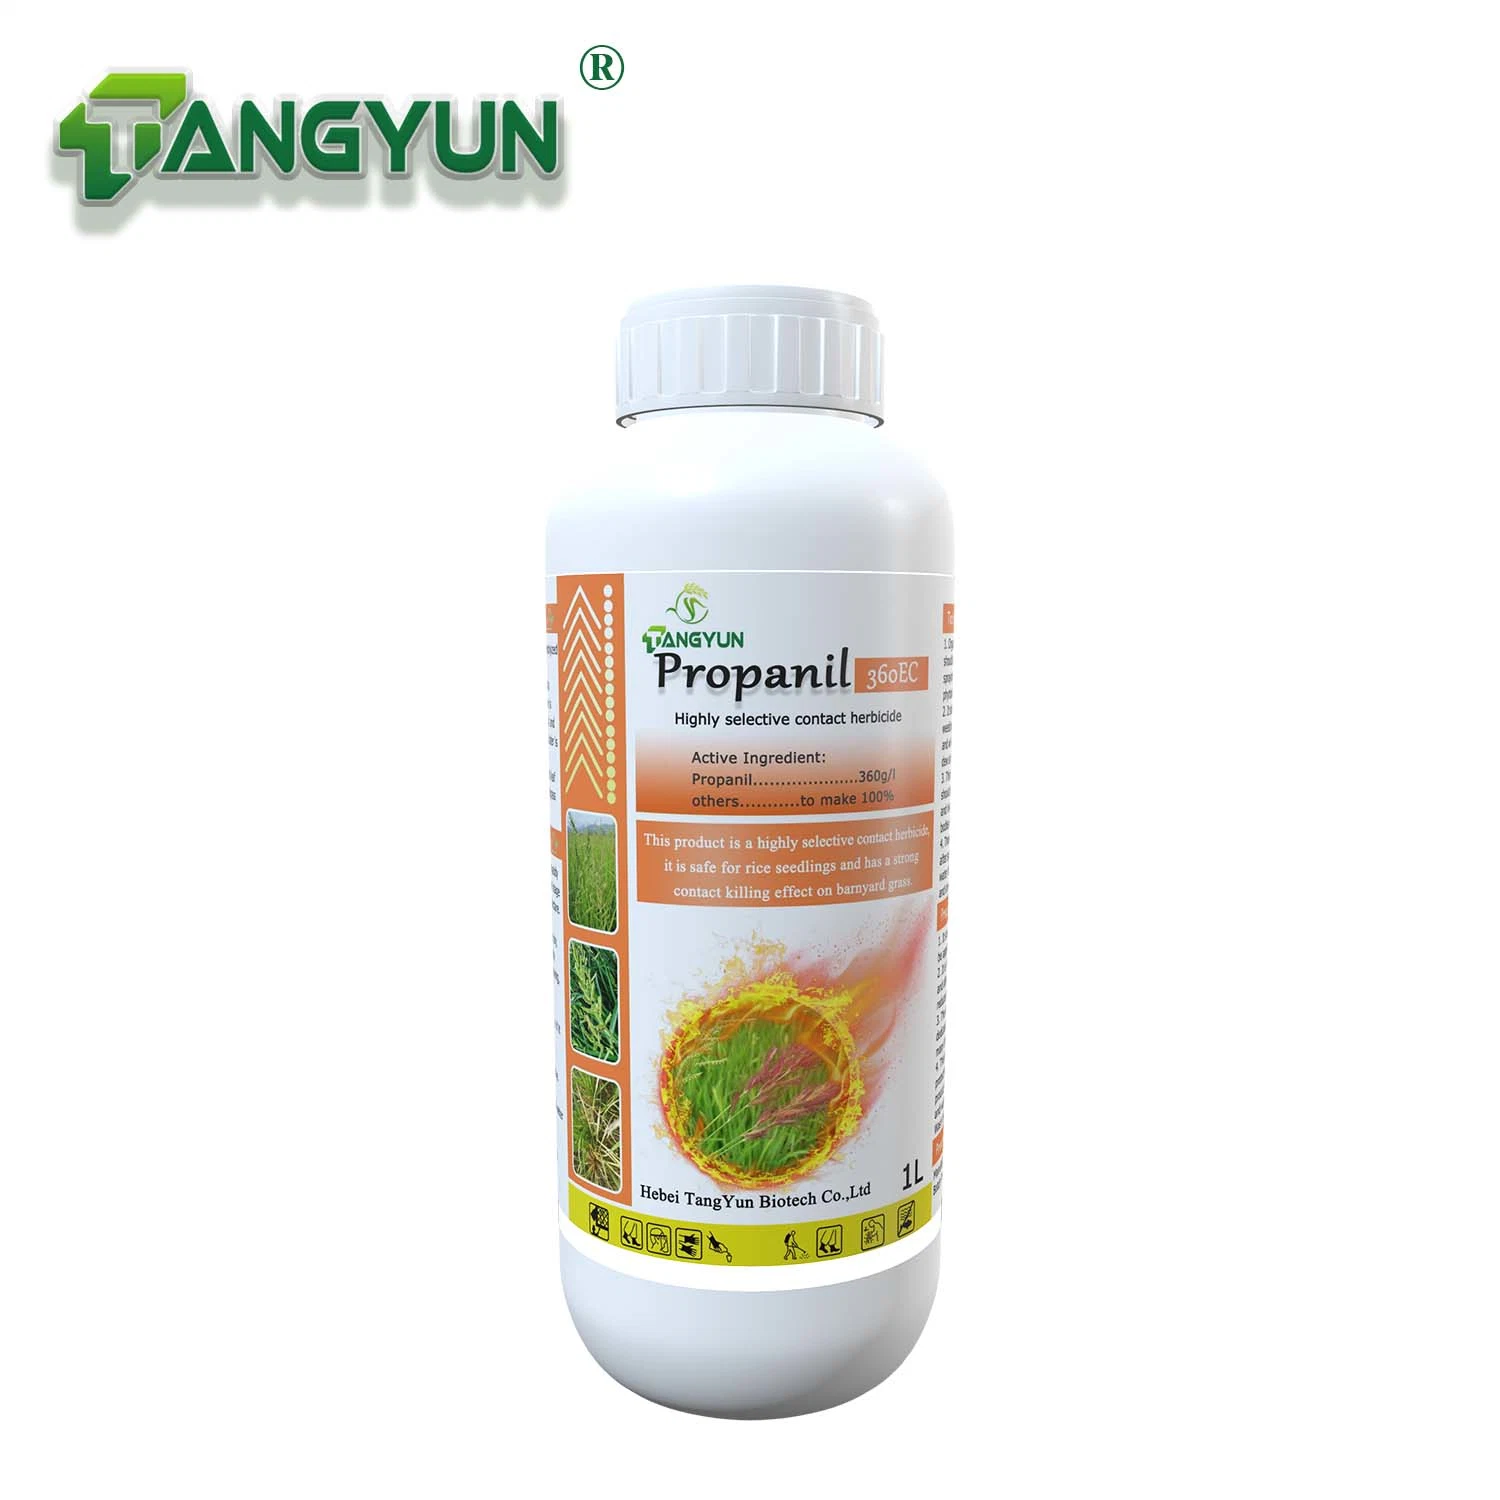 Propanil 36% Ec Highly Selective Contact Herbicide